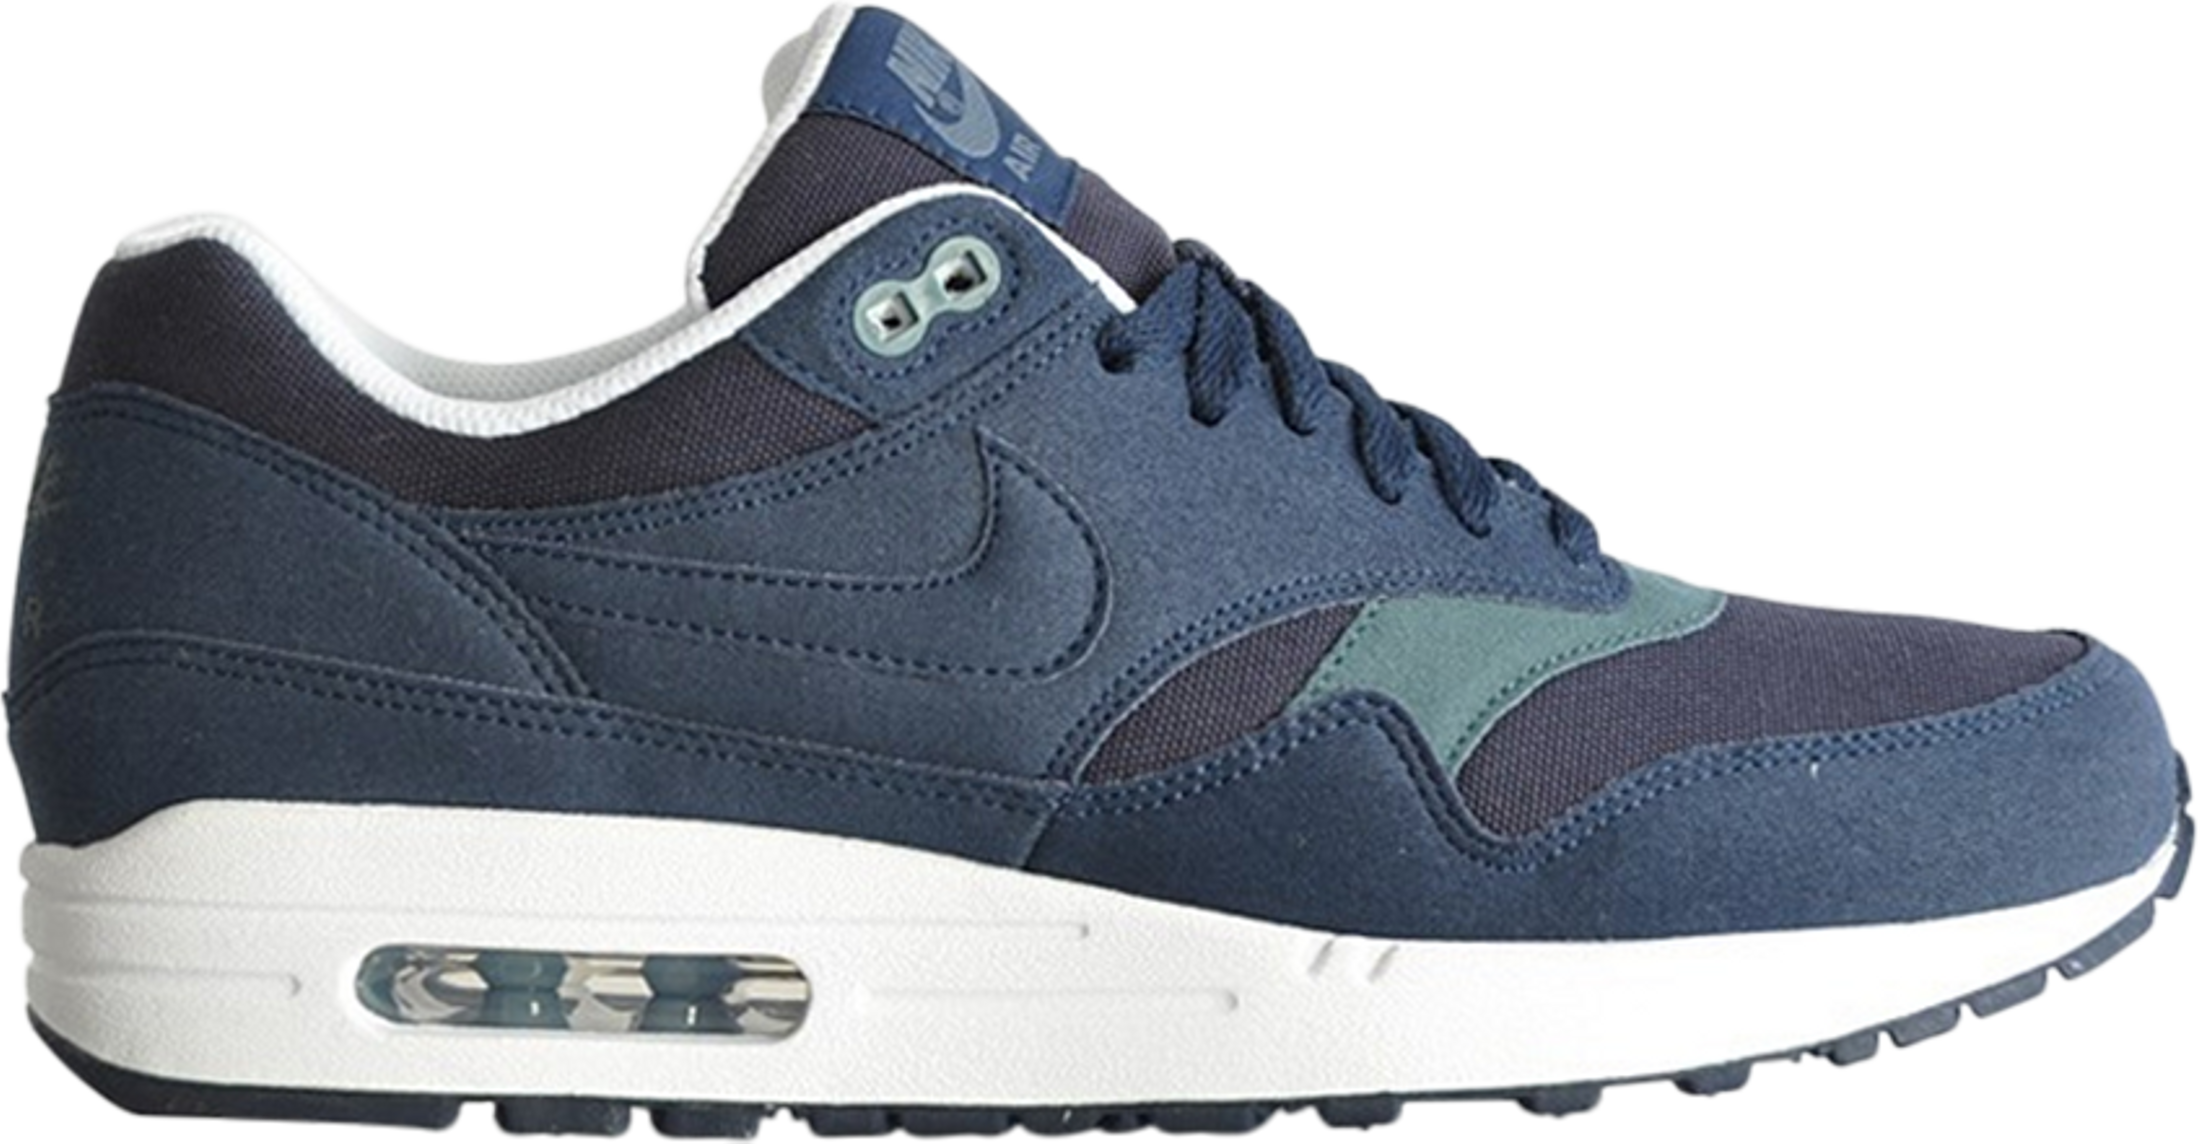 The Air Max 1 '86 'Obsidian' drops today #sneakers #airmax1 #shoes